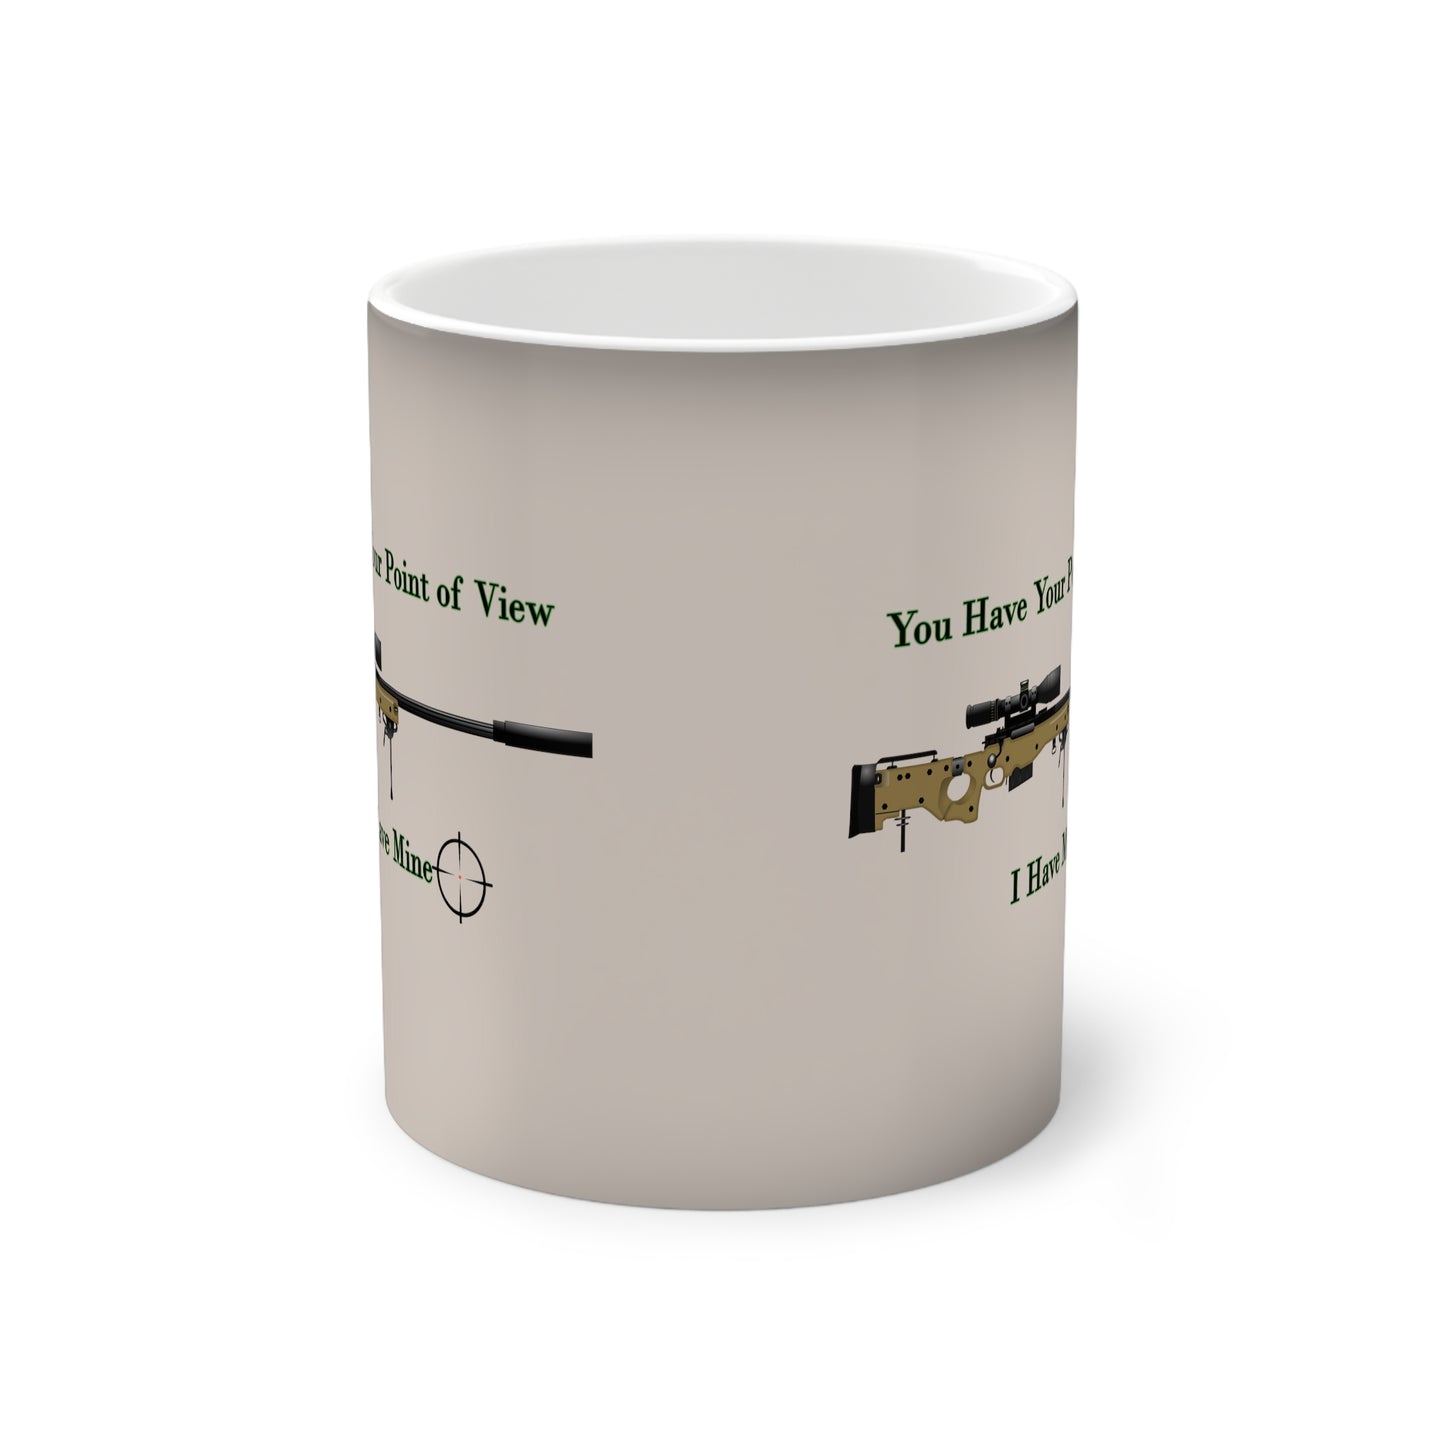 You have your Point of View Color-Changing Mug, 11oz